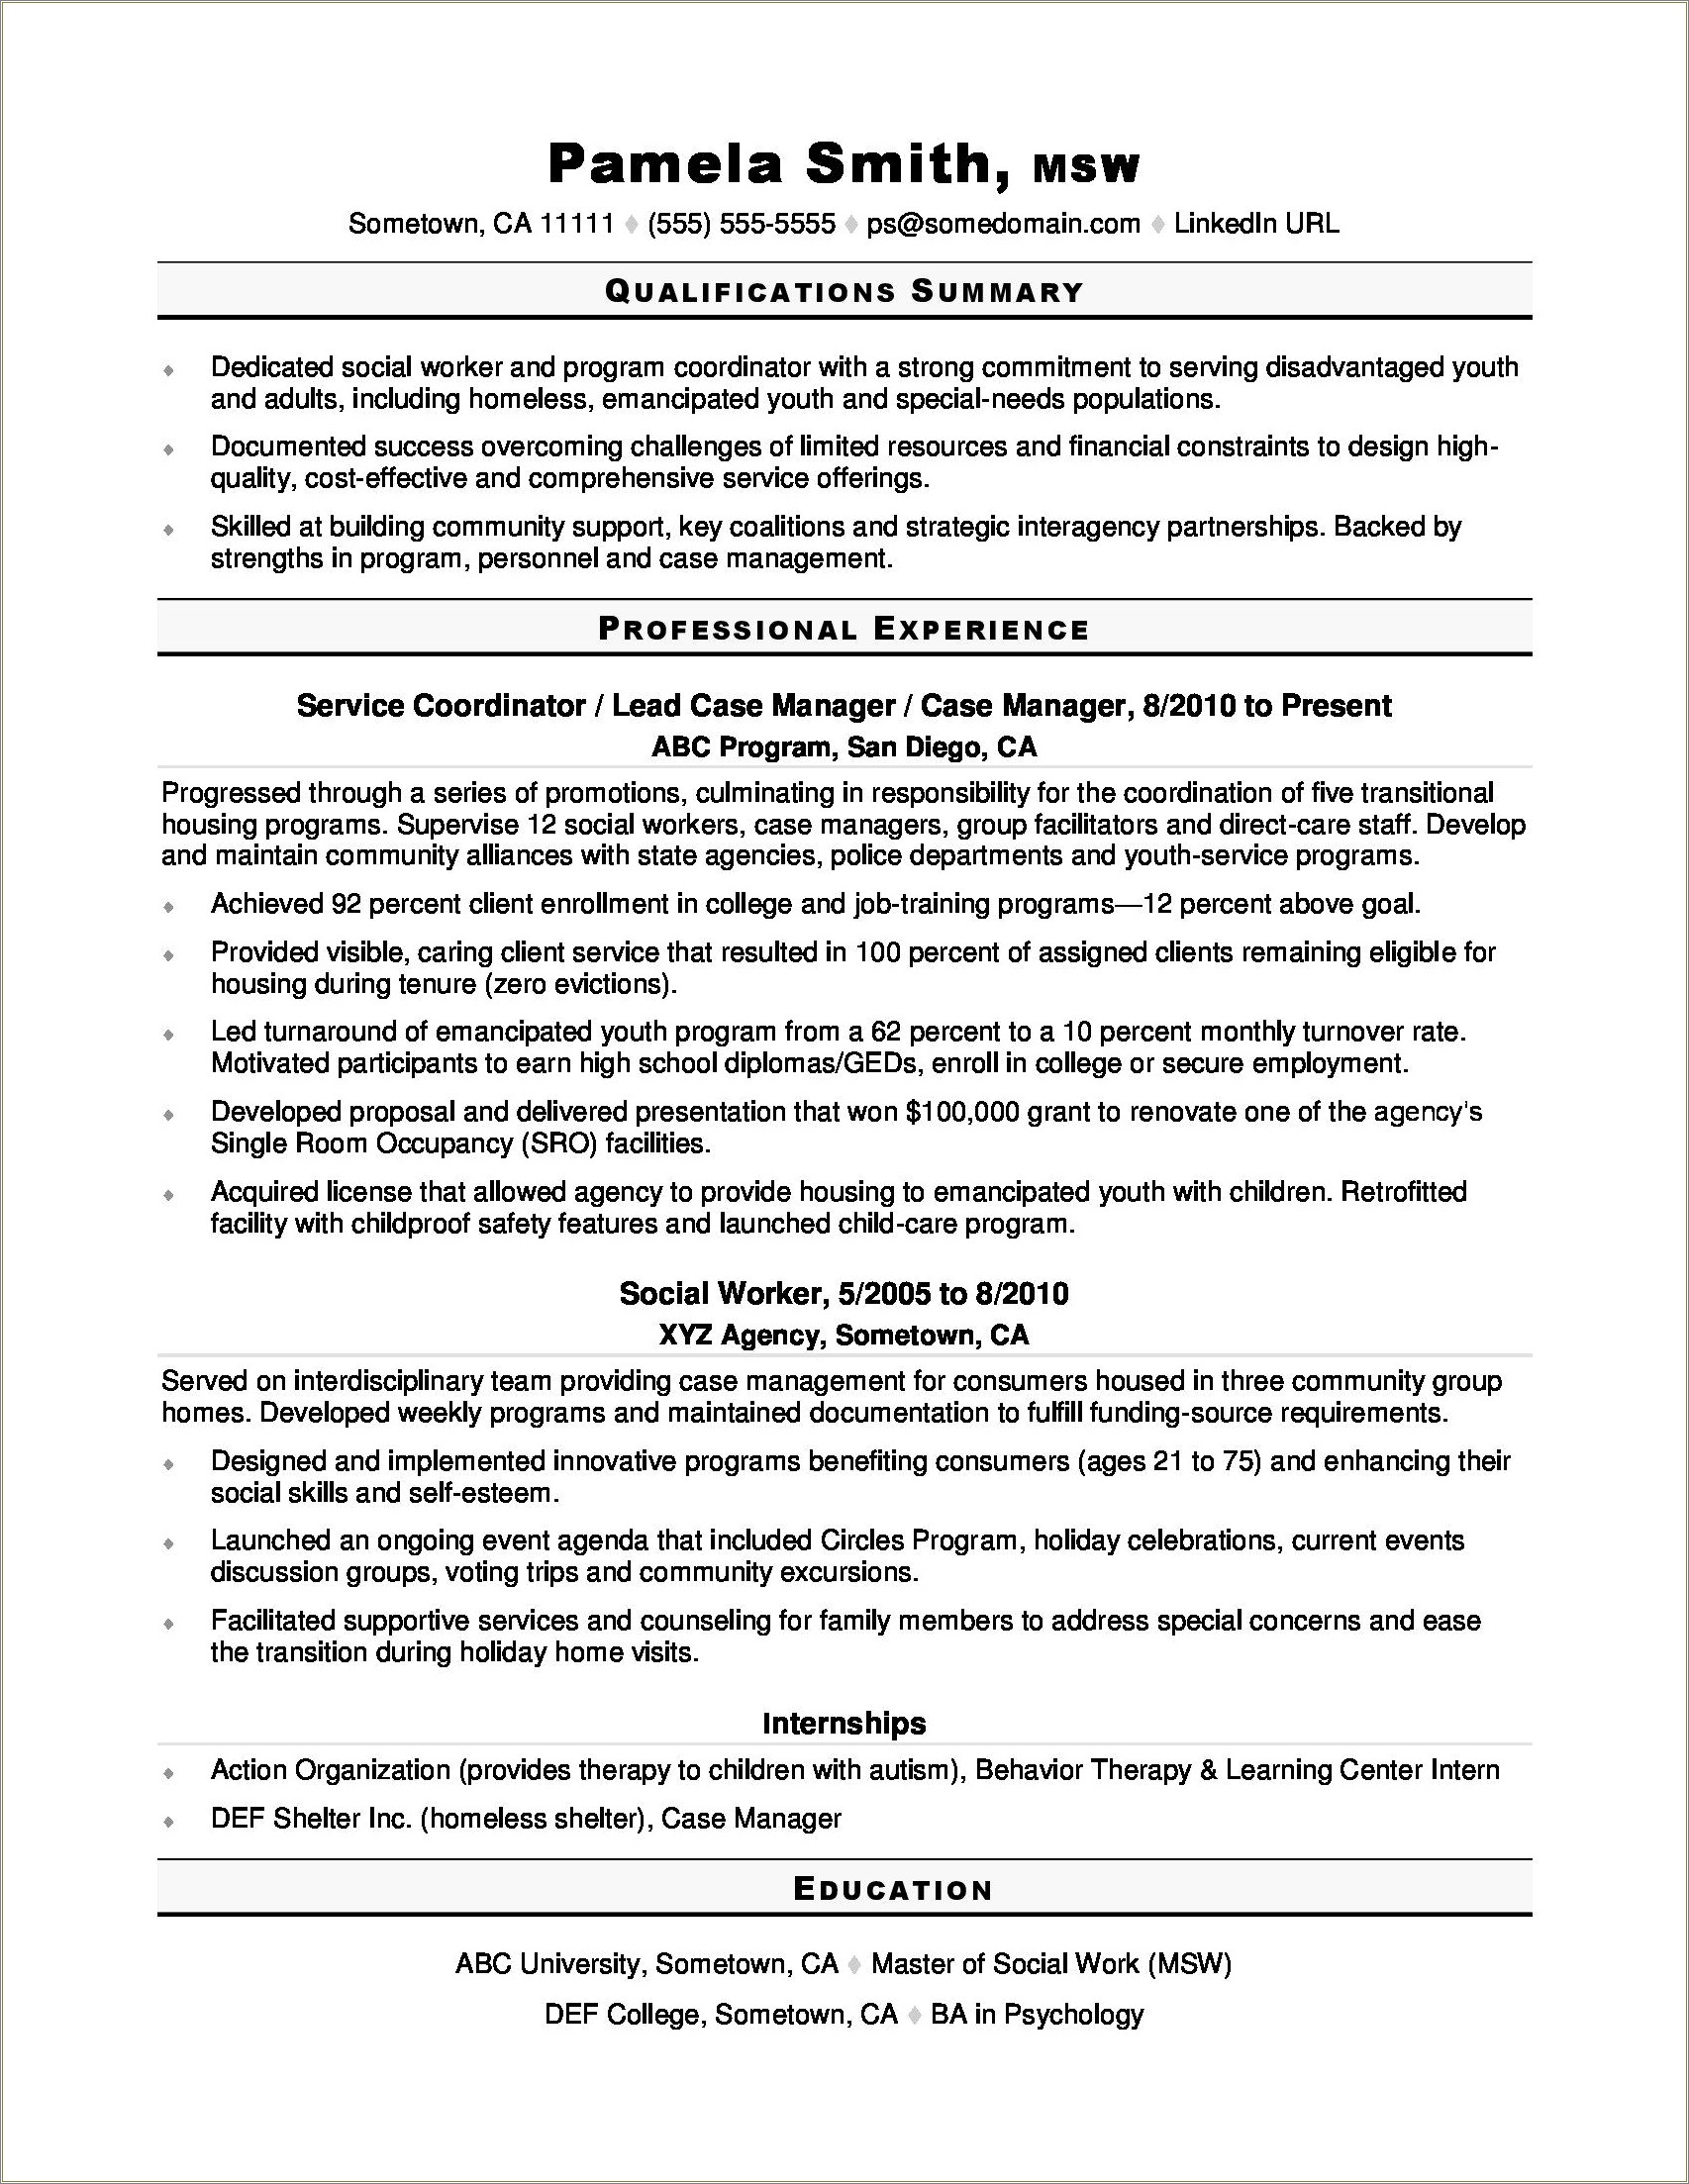 Resume For Working With Children With Autism